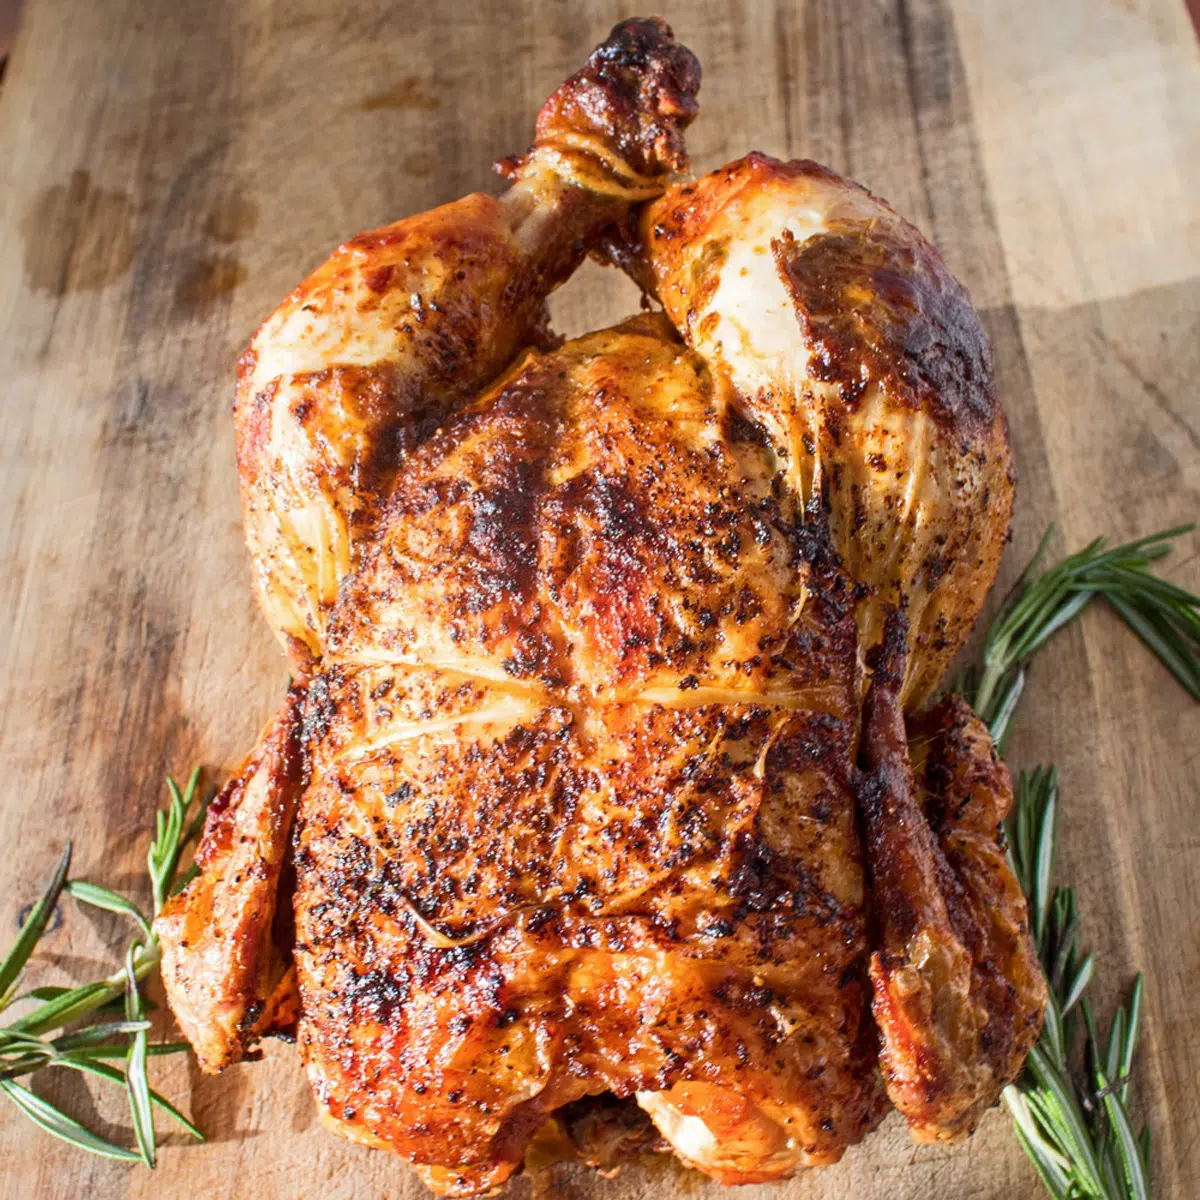 Rotisserie chicken on a cutting board with fresh rosemary.